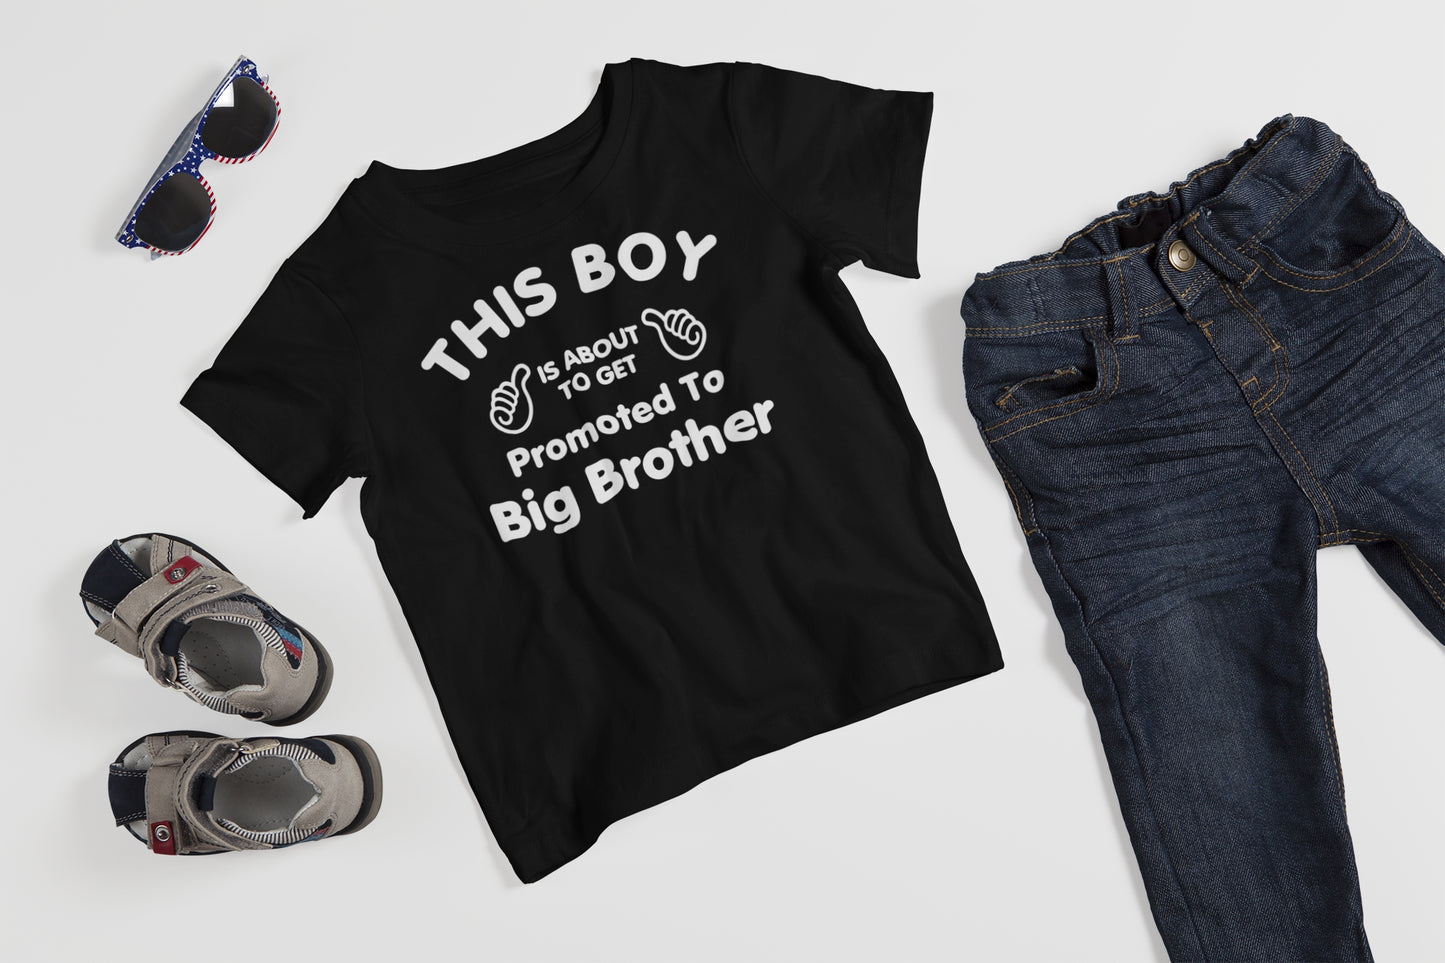 This Boy is About To Get Promoted To Big Brother on Youth T-Shirt (#975-201)